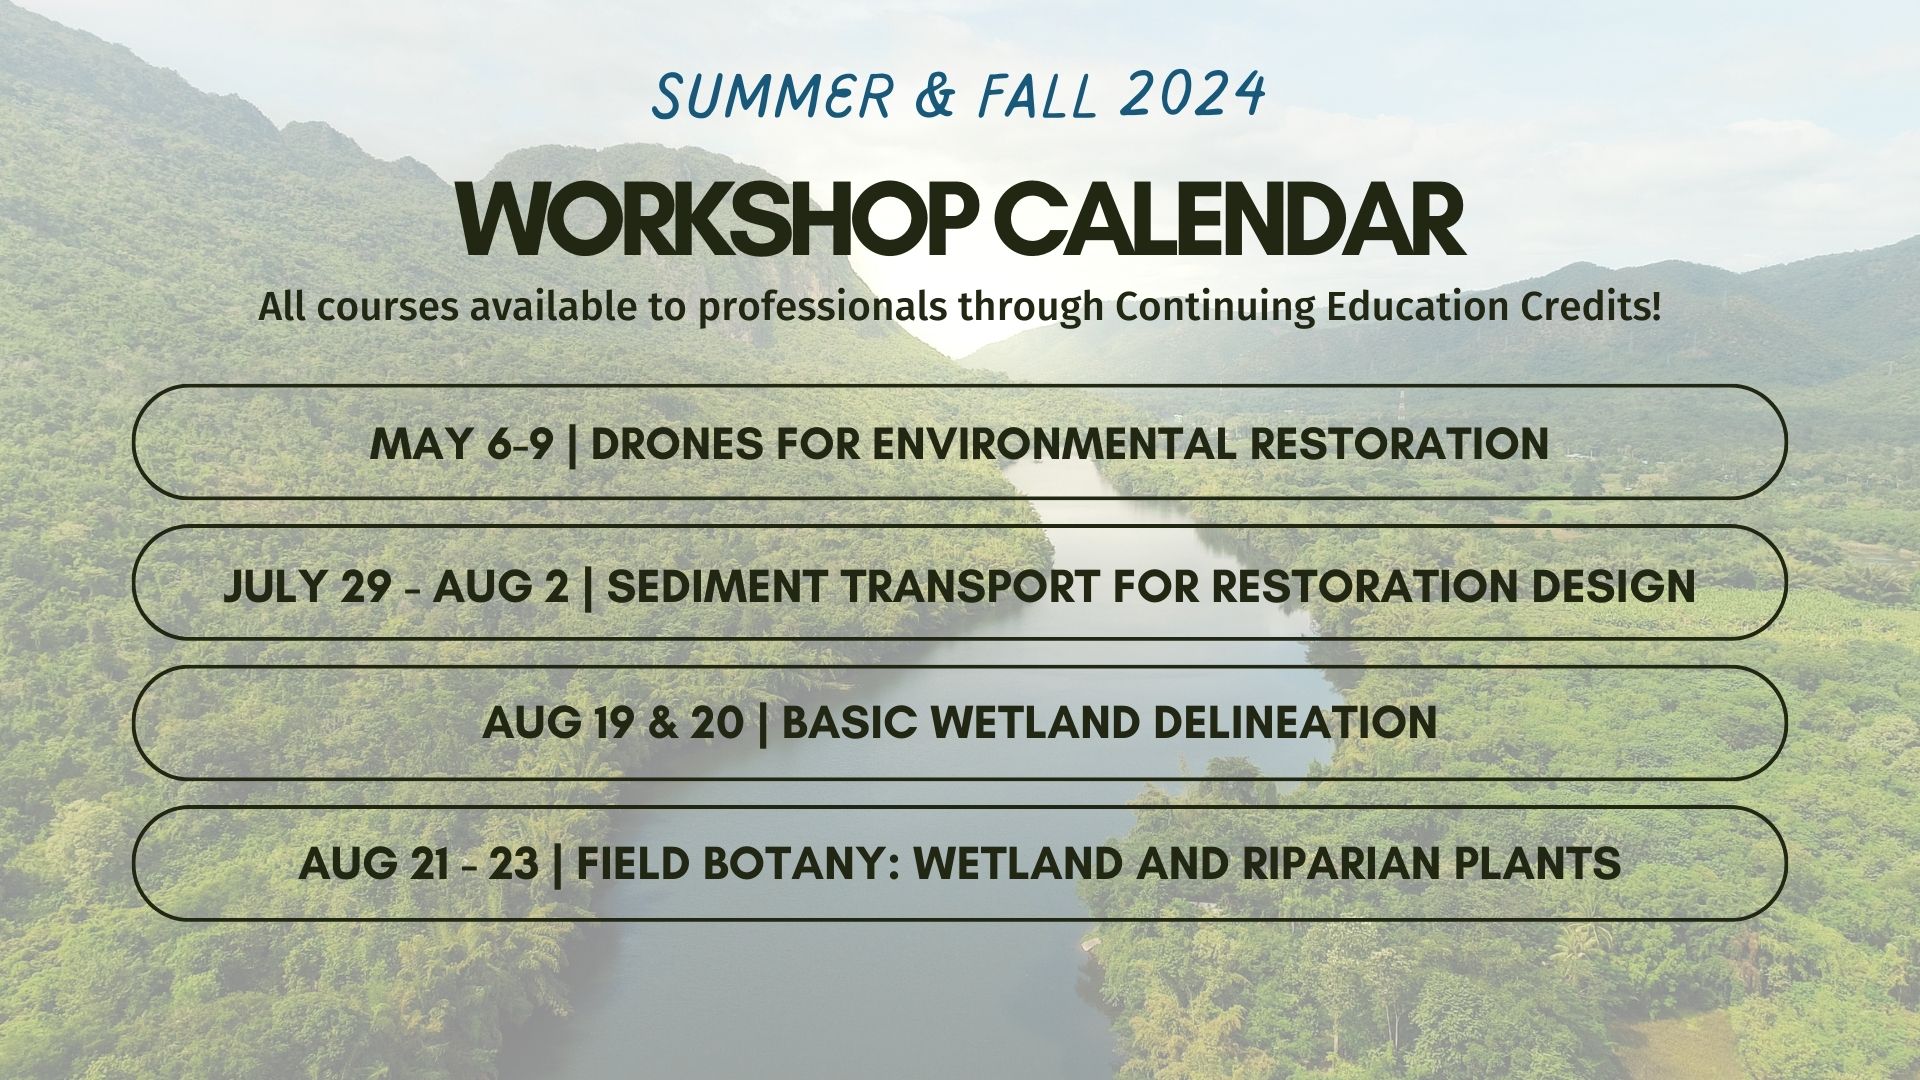 Summer '24 course offerings: Drones for Environmental Restoration, Sediment Transport, Basic Wetland Delineation, Field Botany: Wetland and Riparian Plants